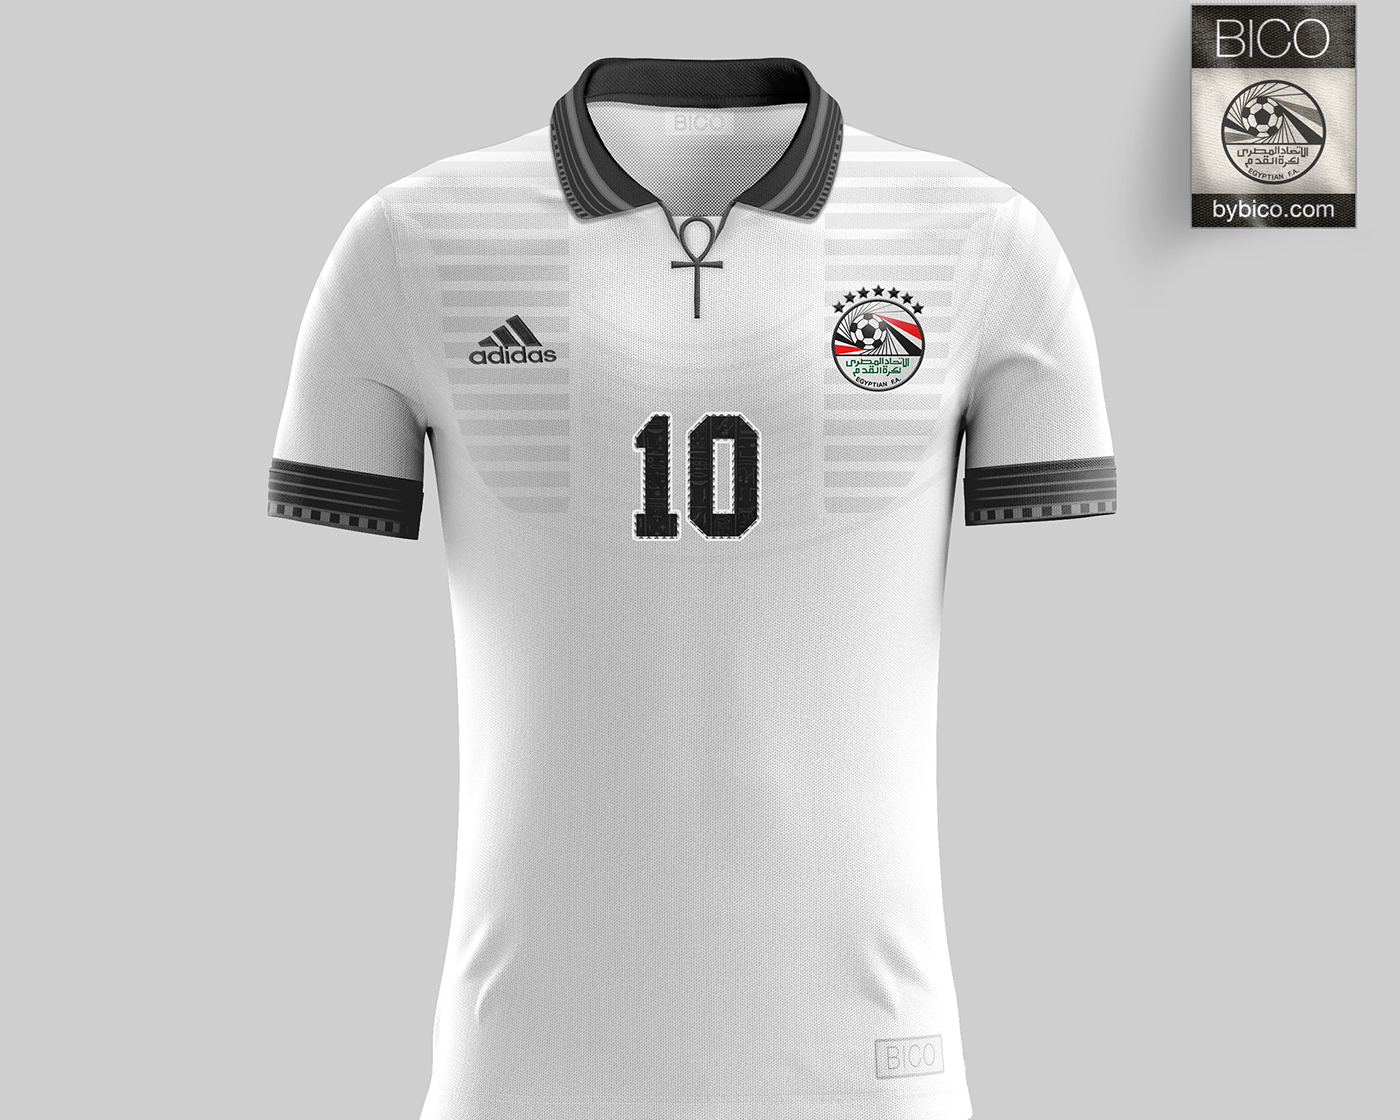 egypt ancient egypt football adidas kit soccer concept world cup redesign pattern